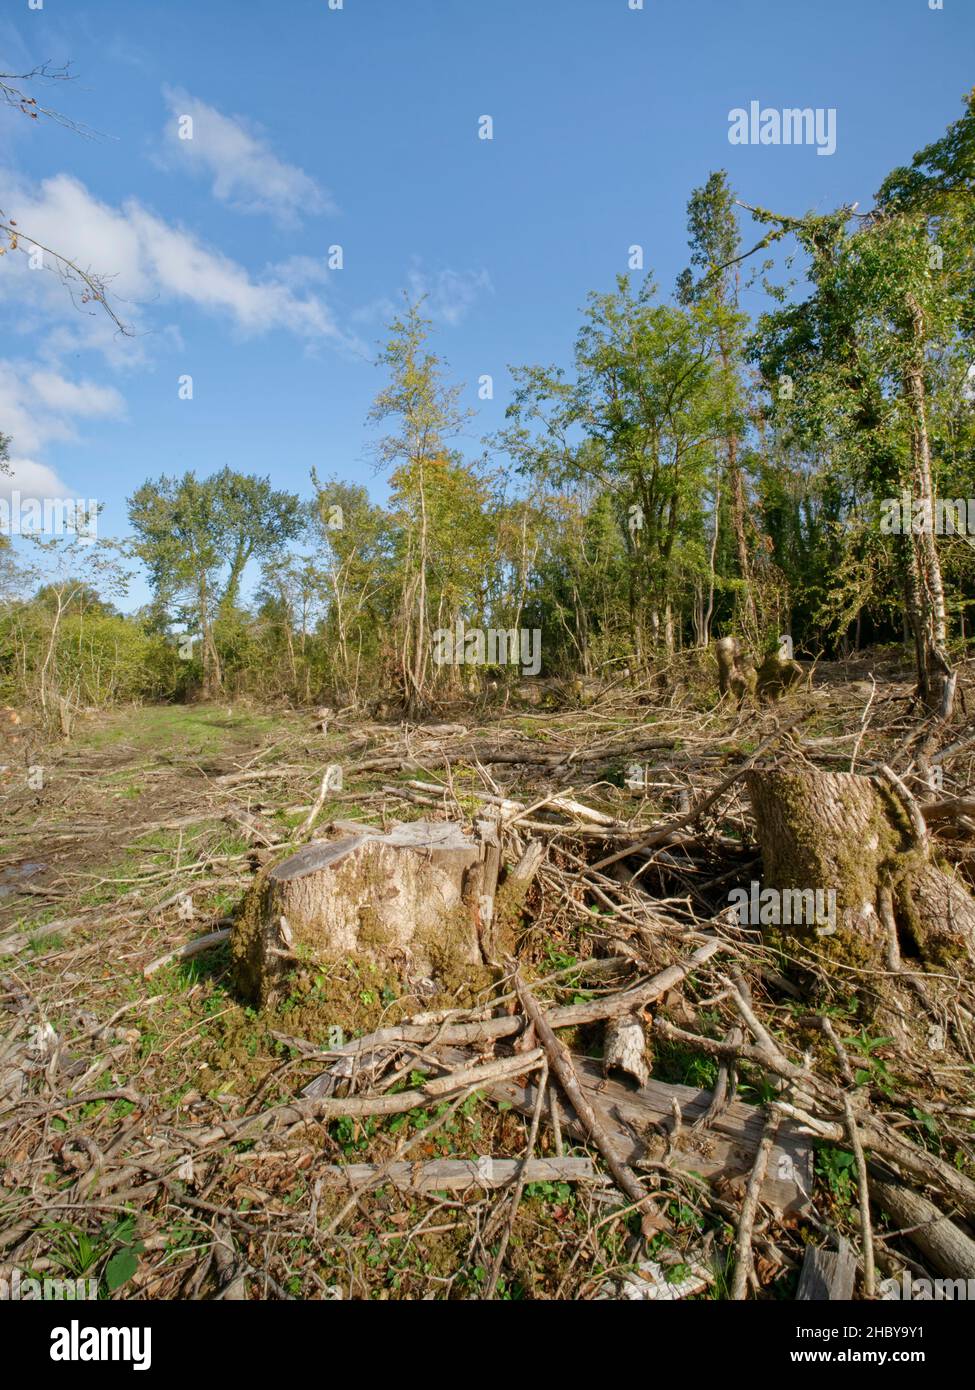 Ash trees (Fraxinus excelsior) killed by Ash dieback disease (Hymenoscypus fraxineus) felled during major woodland management work, Lower Woods, Glos. Stock Photo